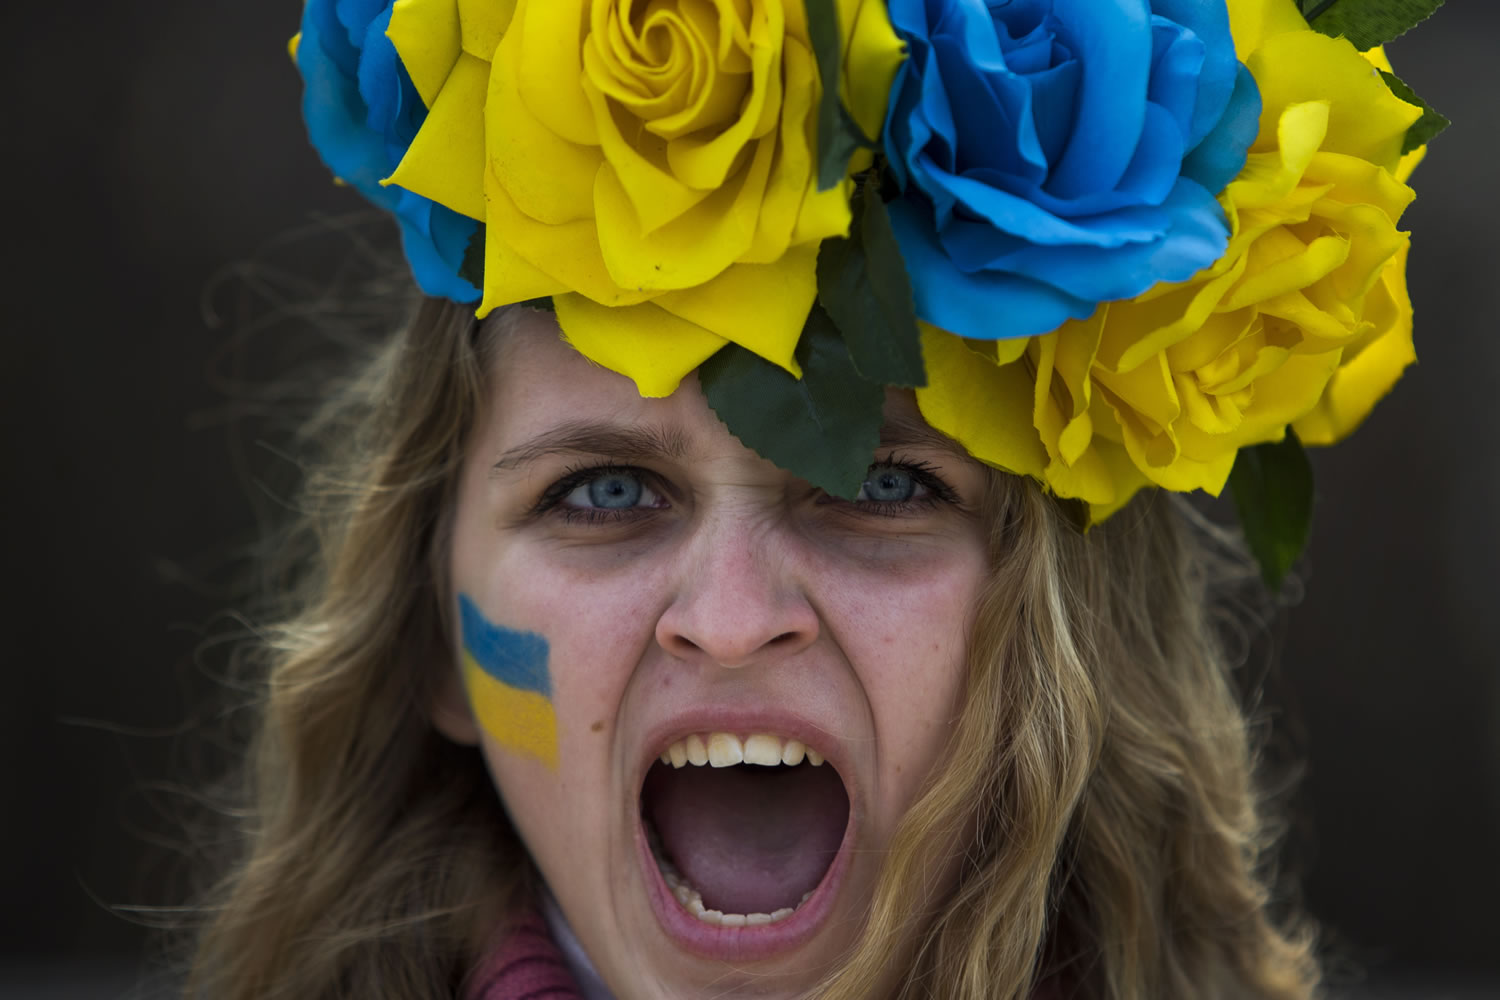 A protestor shouts slogans during a demonstration in support of Ukraine's protests against Viktor Yanukovych's government in Madrid, Spain, Sunday, Jan. 26, 2014. The protests began in late November in Ukraine after President Viktor Yanukovych shelved a long-awaited agreement to deepen ties with the European Union, but they have been increasingly gripped by people seeking more radical action even as moderate opposition leaders have pleaded for a stop to violence. In the past week, demonstrators have seized government administration buildings in a score of cities in western Ukraine, where Yanukovych's support is weak and desire for European ties is strong.